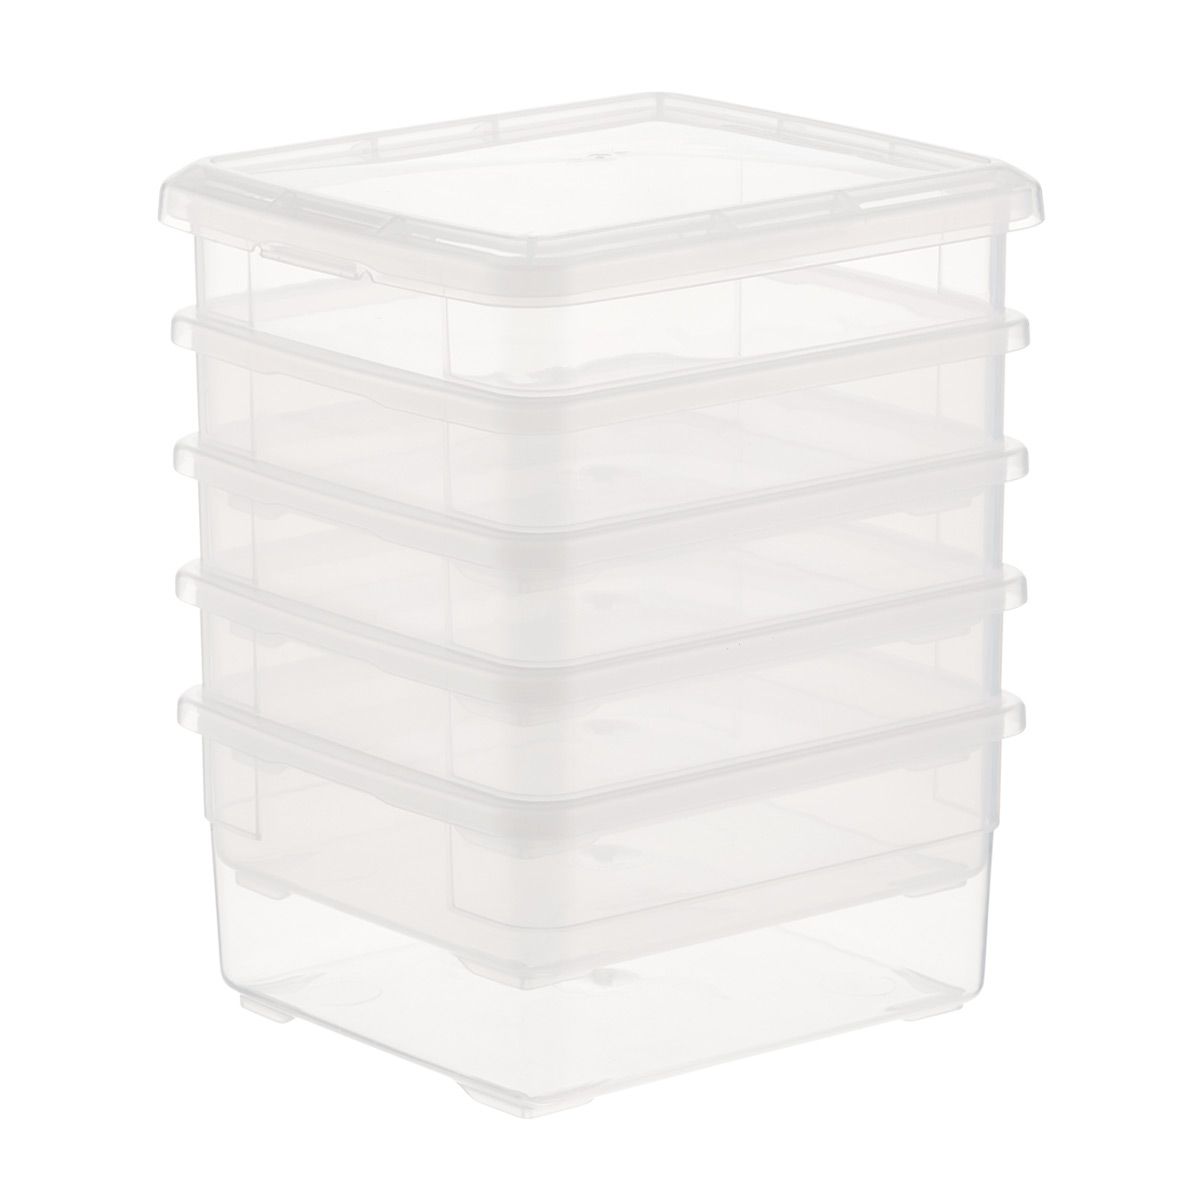 Case of 5 Our Accessory Box Clear | The Container Store